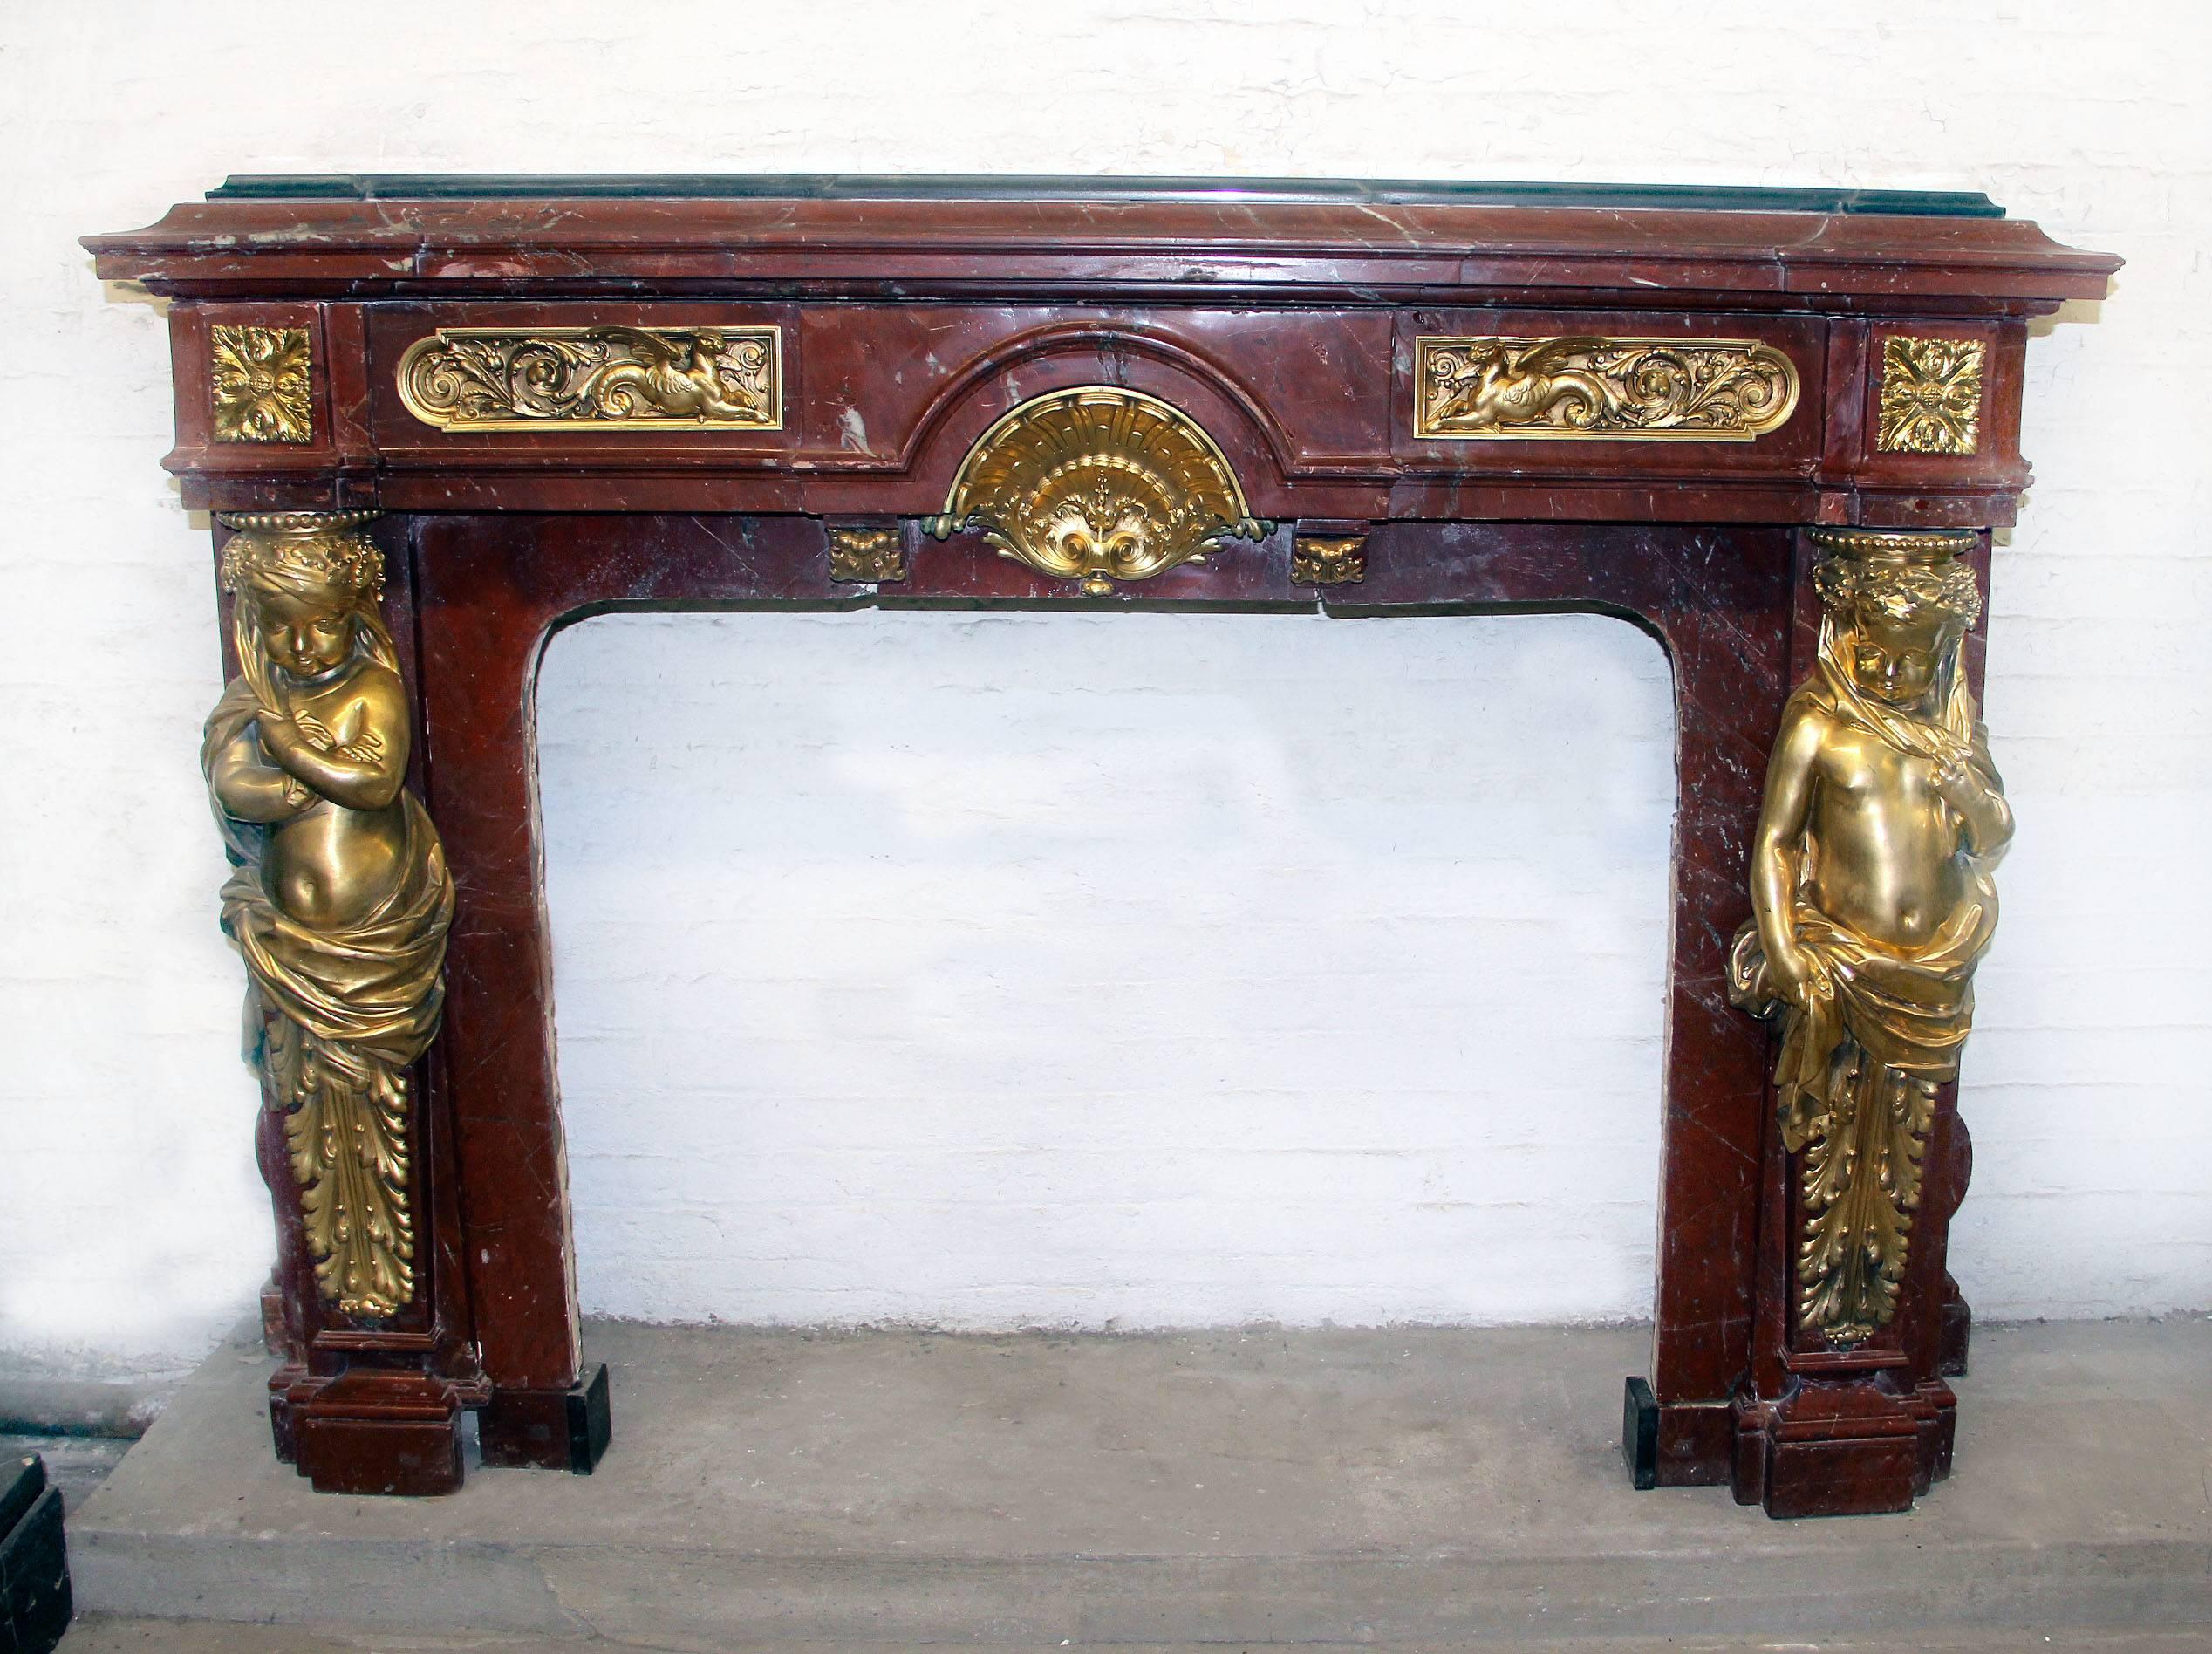 A very fine and palatial late 19th century gilt bronze-mounted rouge royal marble fireplace

A thick and heavy marble frieze with two gilt bronze plaques with griffins and scrolling foliage and centered with an inverted sea shell design. The legs